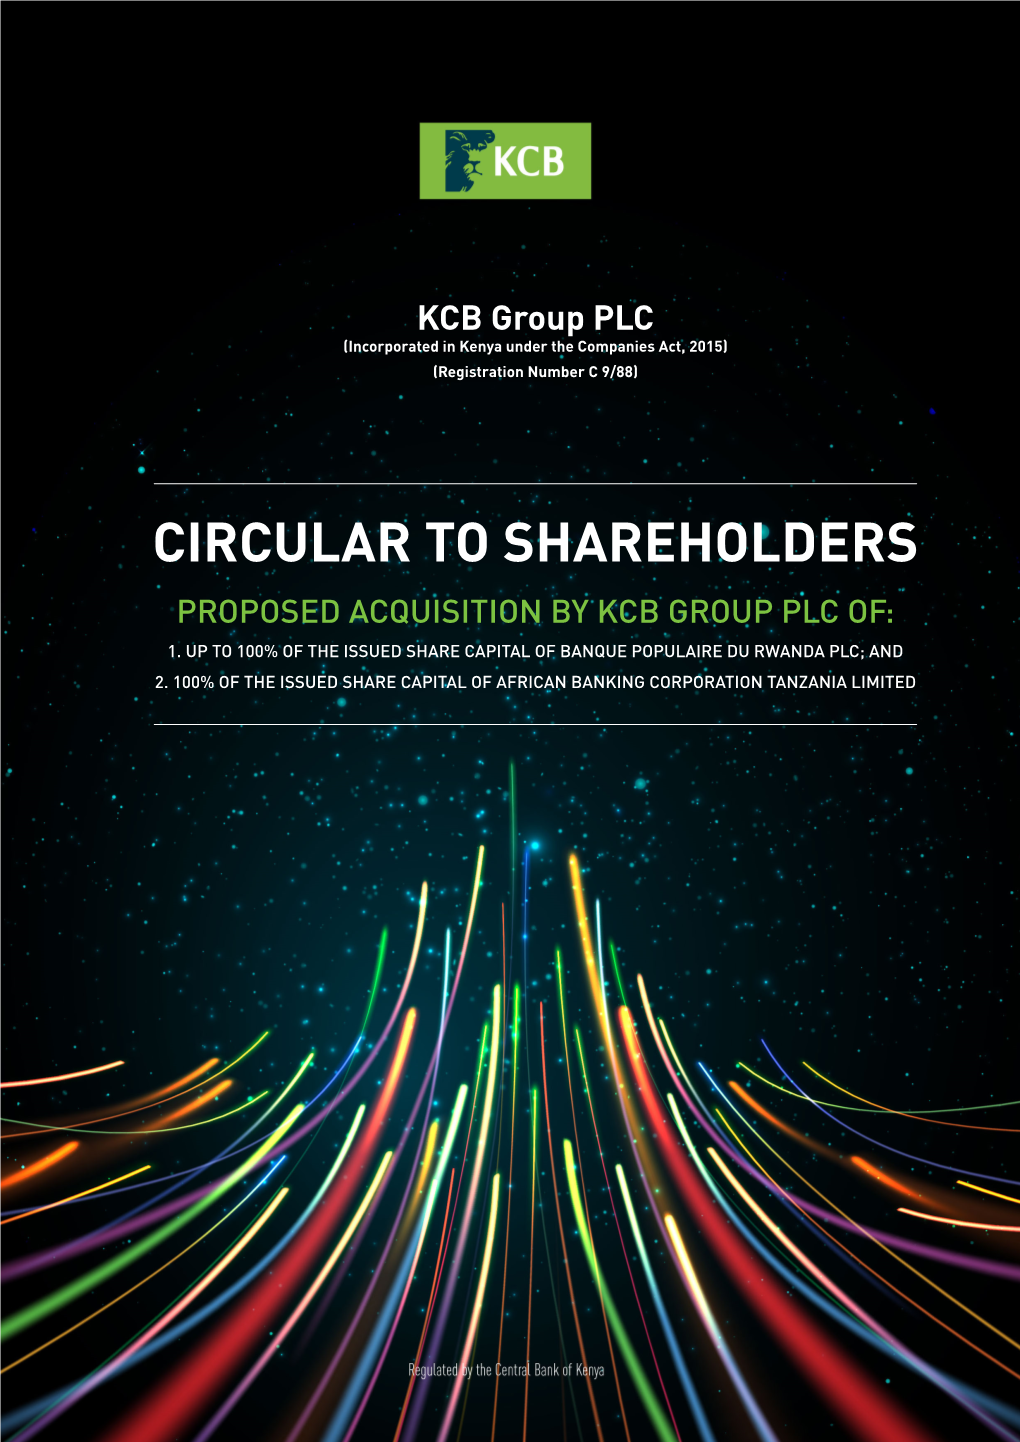 KCB-Group-Circular-To-Shareholders-On-The-Acquisition-Of-BPR-And-Bancabc.Pdf